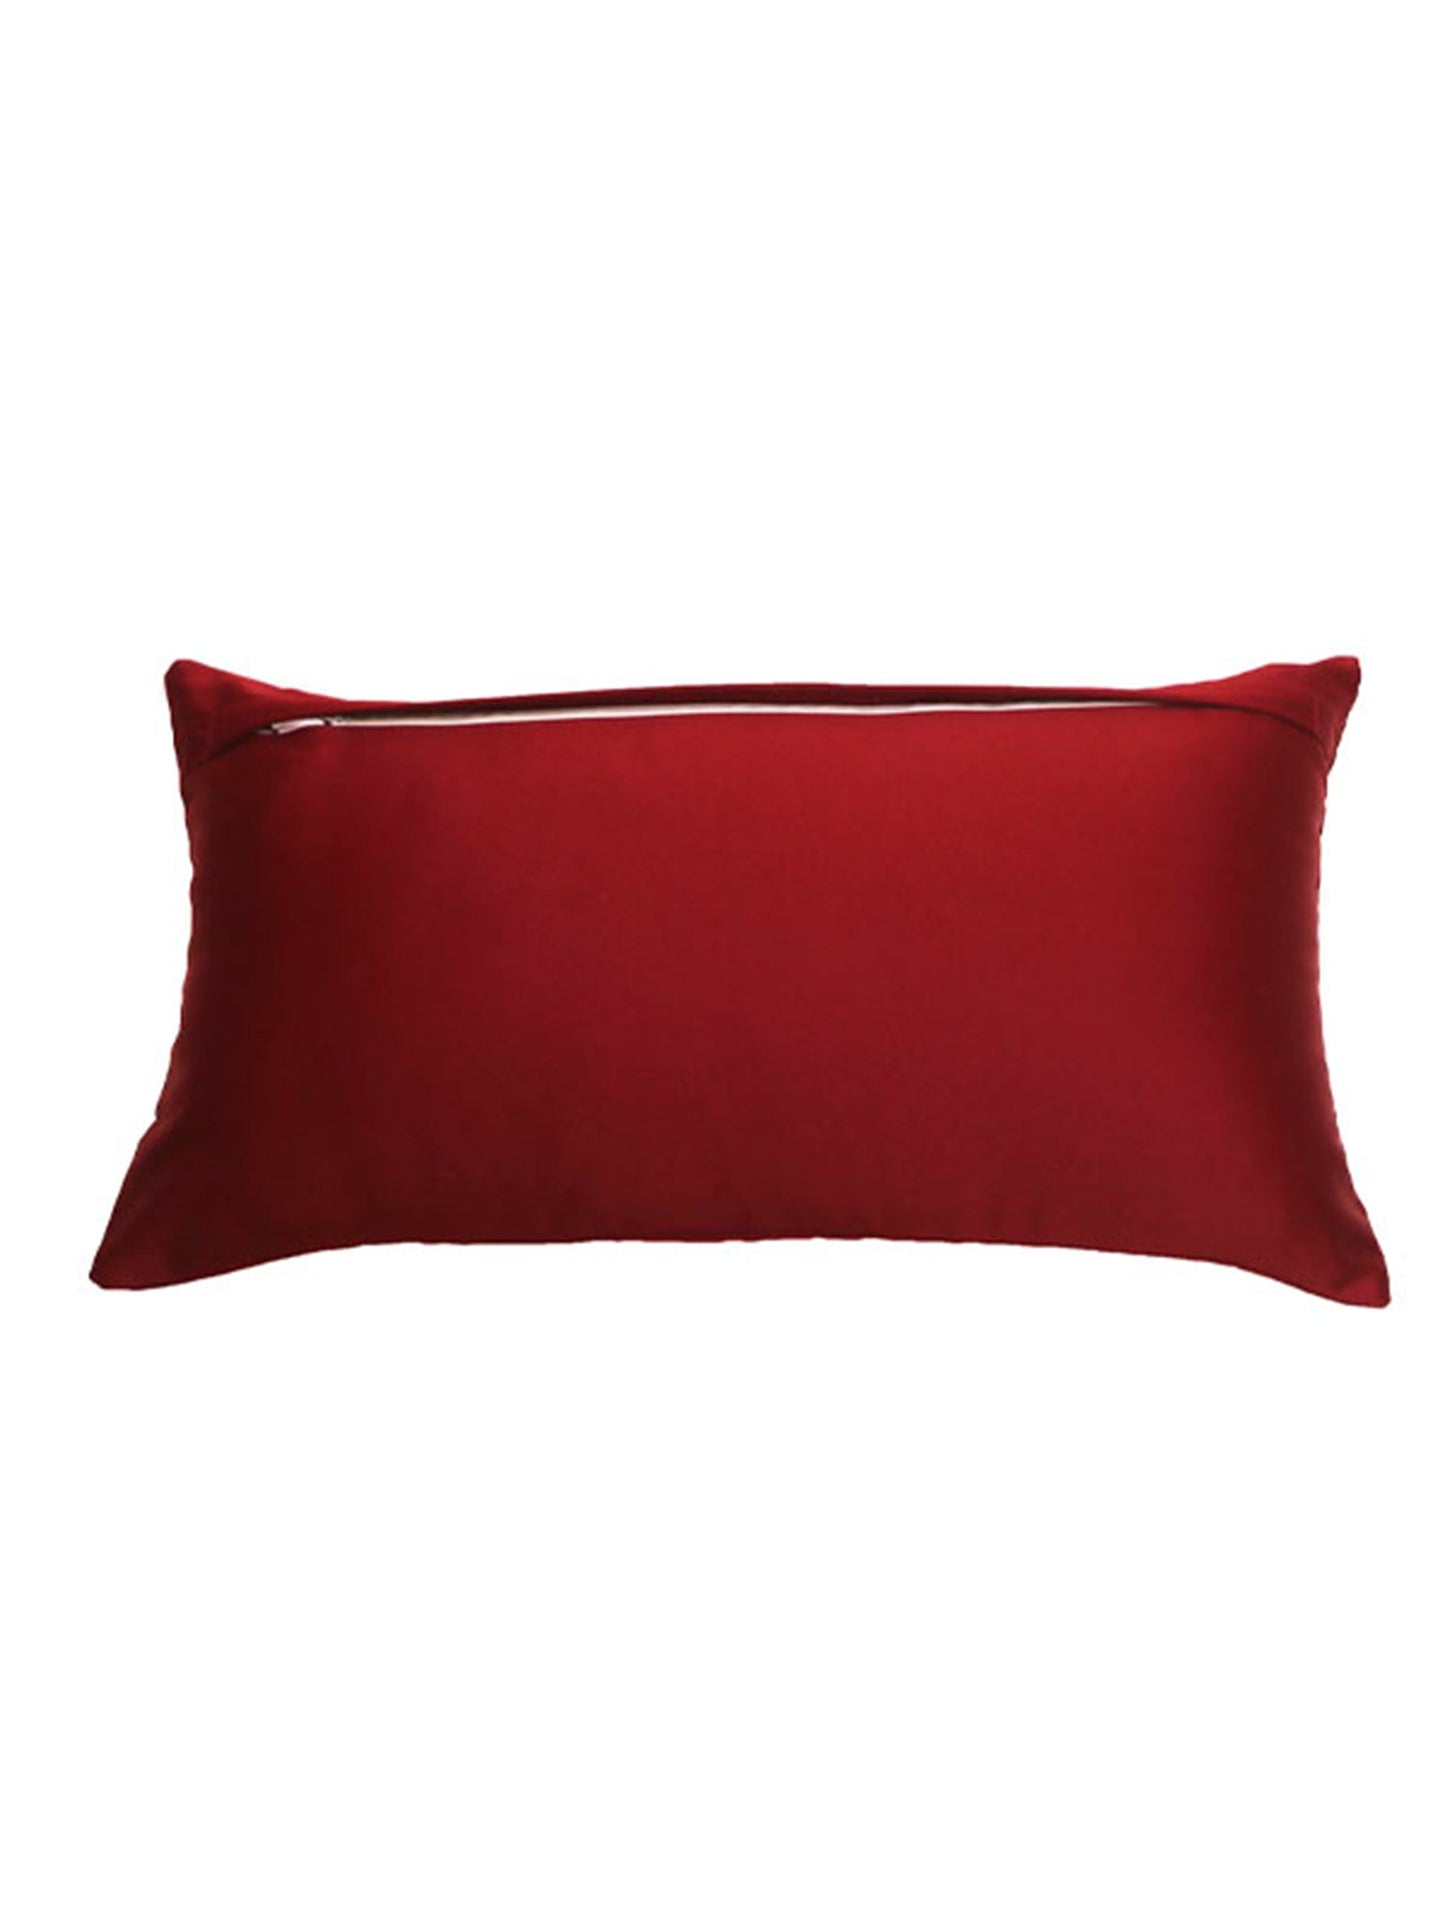 Technique Cushion Cover 100% Polyester Quilted Maroon - 12" X 22"